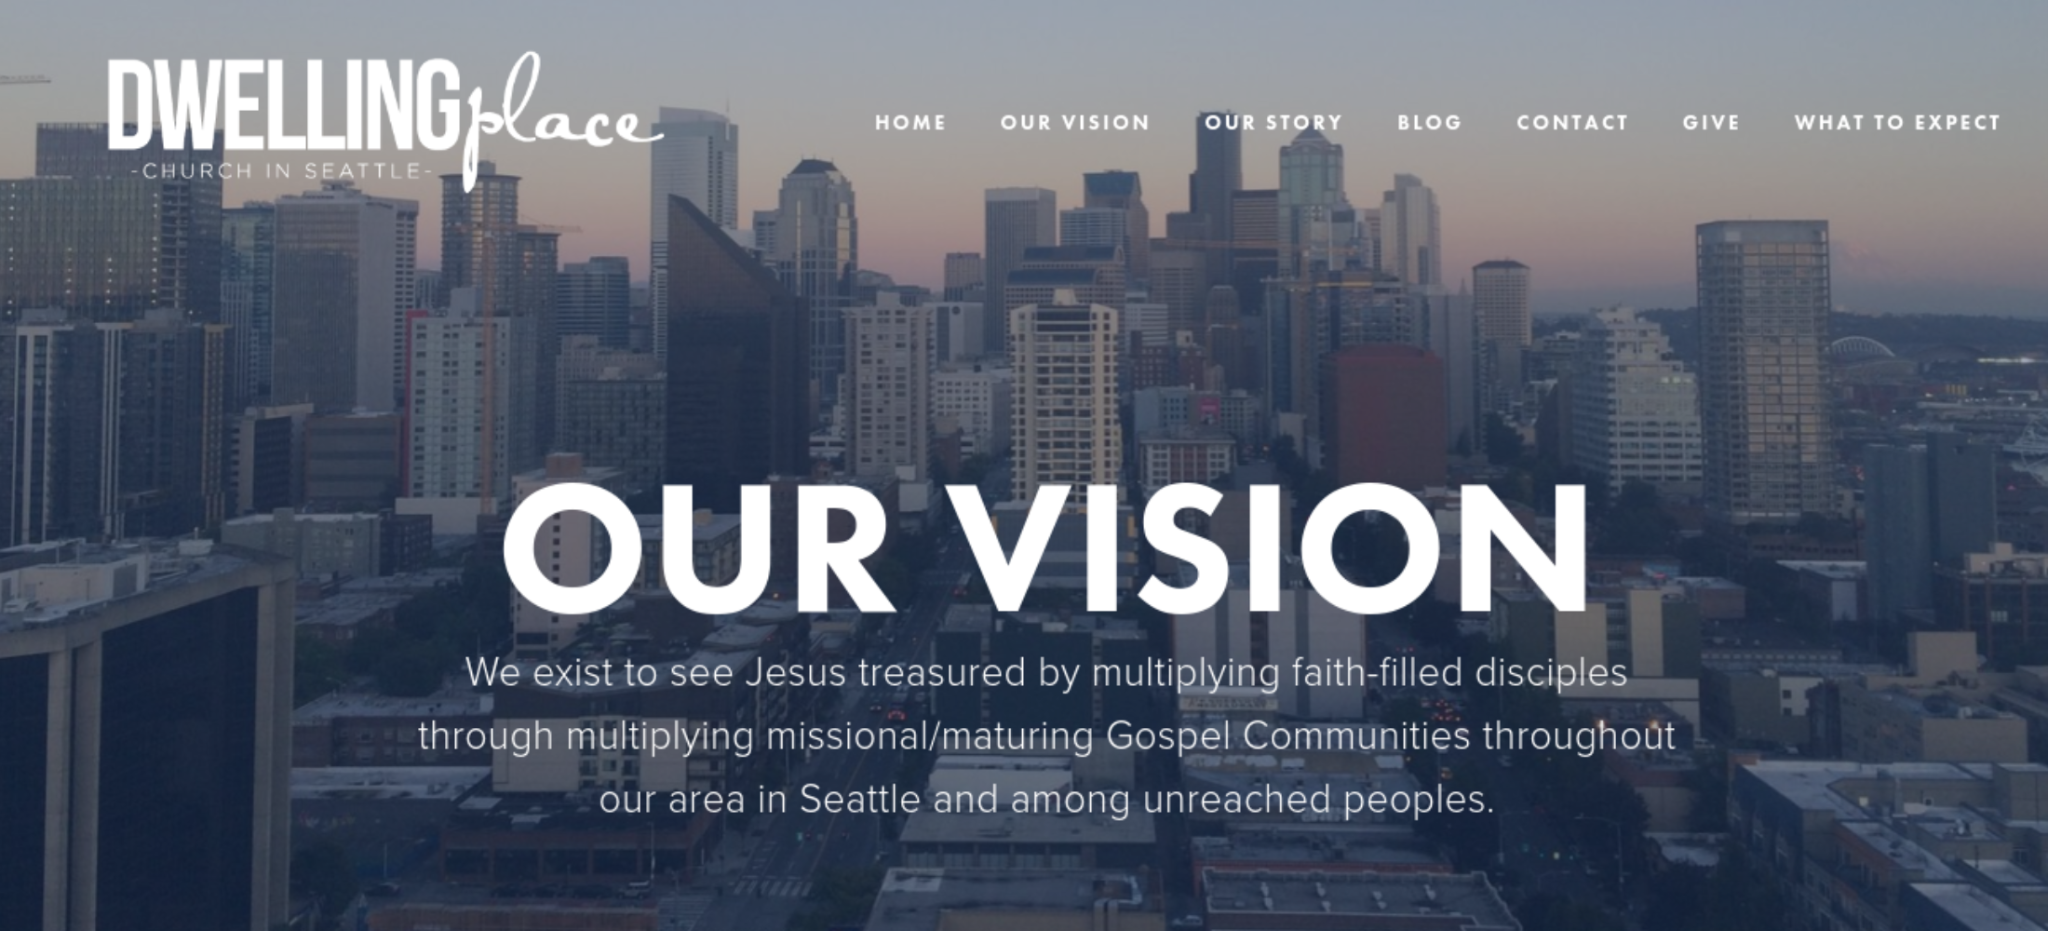 Screenshot of Dwelling Place's website showing their vision statement. 